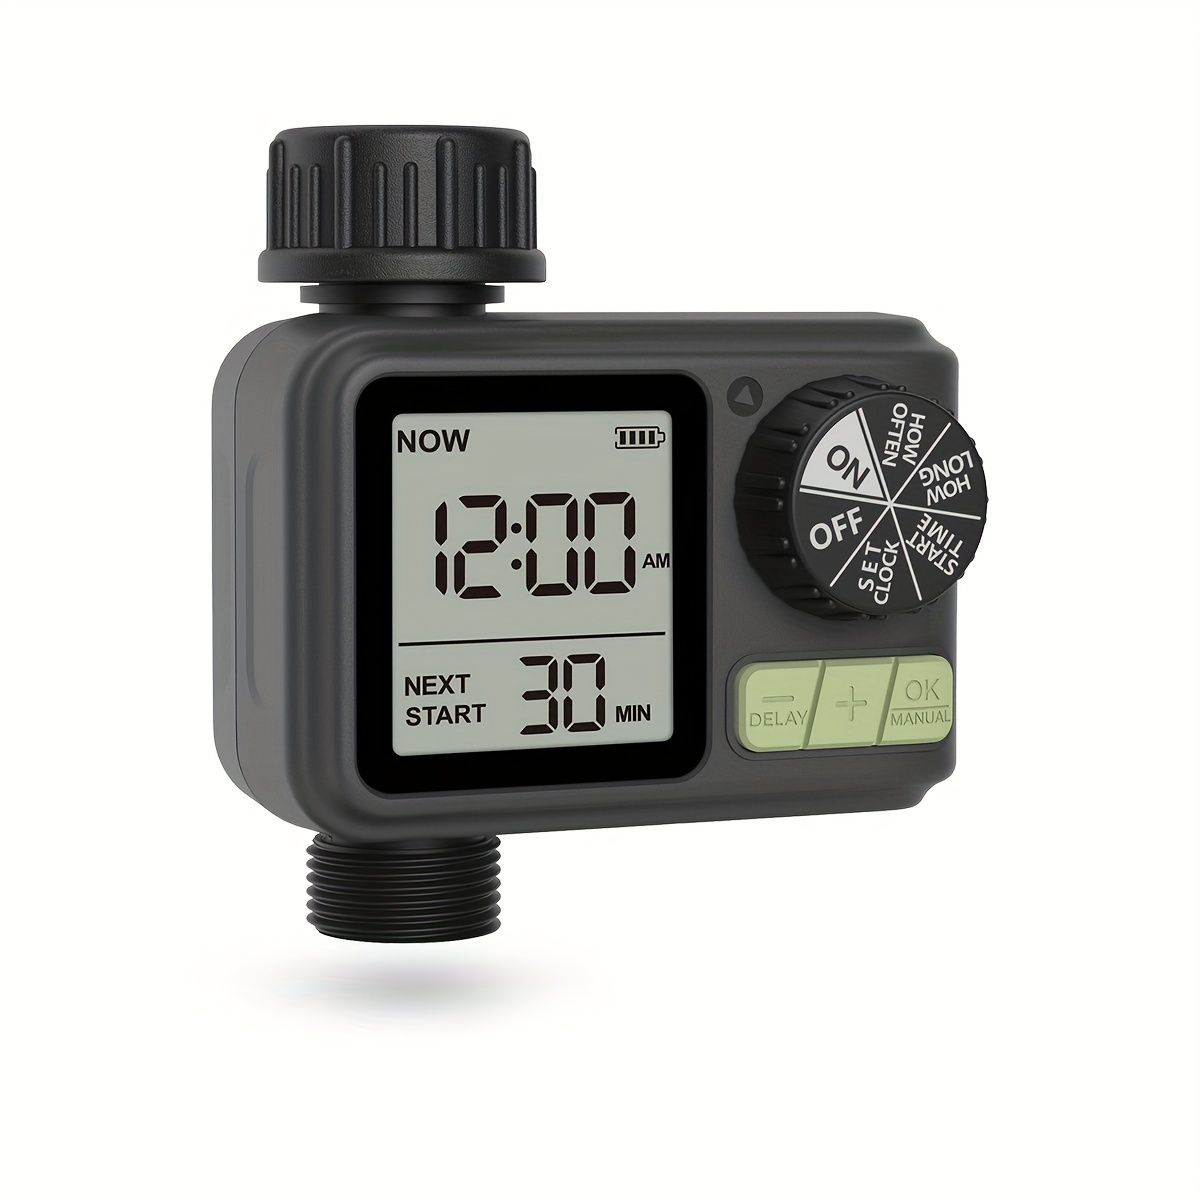 

1pc, Digital Water Timer For Garden, Automatic Irrigation System, 4.72*4.72*2.36 Inches, Plastic, With Rain Delay Function, For Outdoor Home Gardening